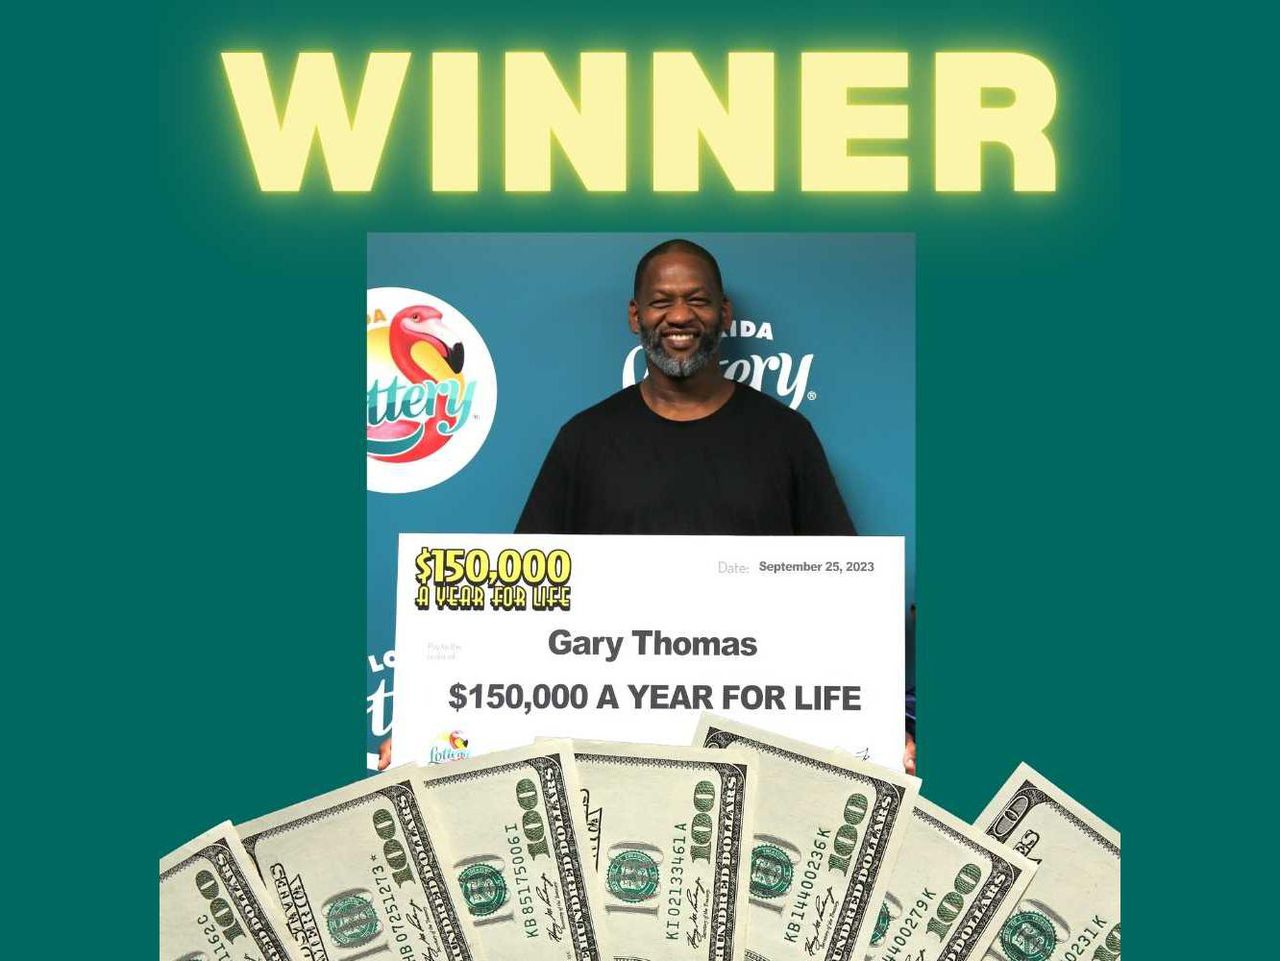 Alabama man wins $2.44 million from Florida Lottery scratch-off ticket